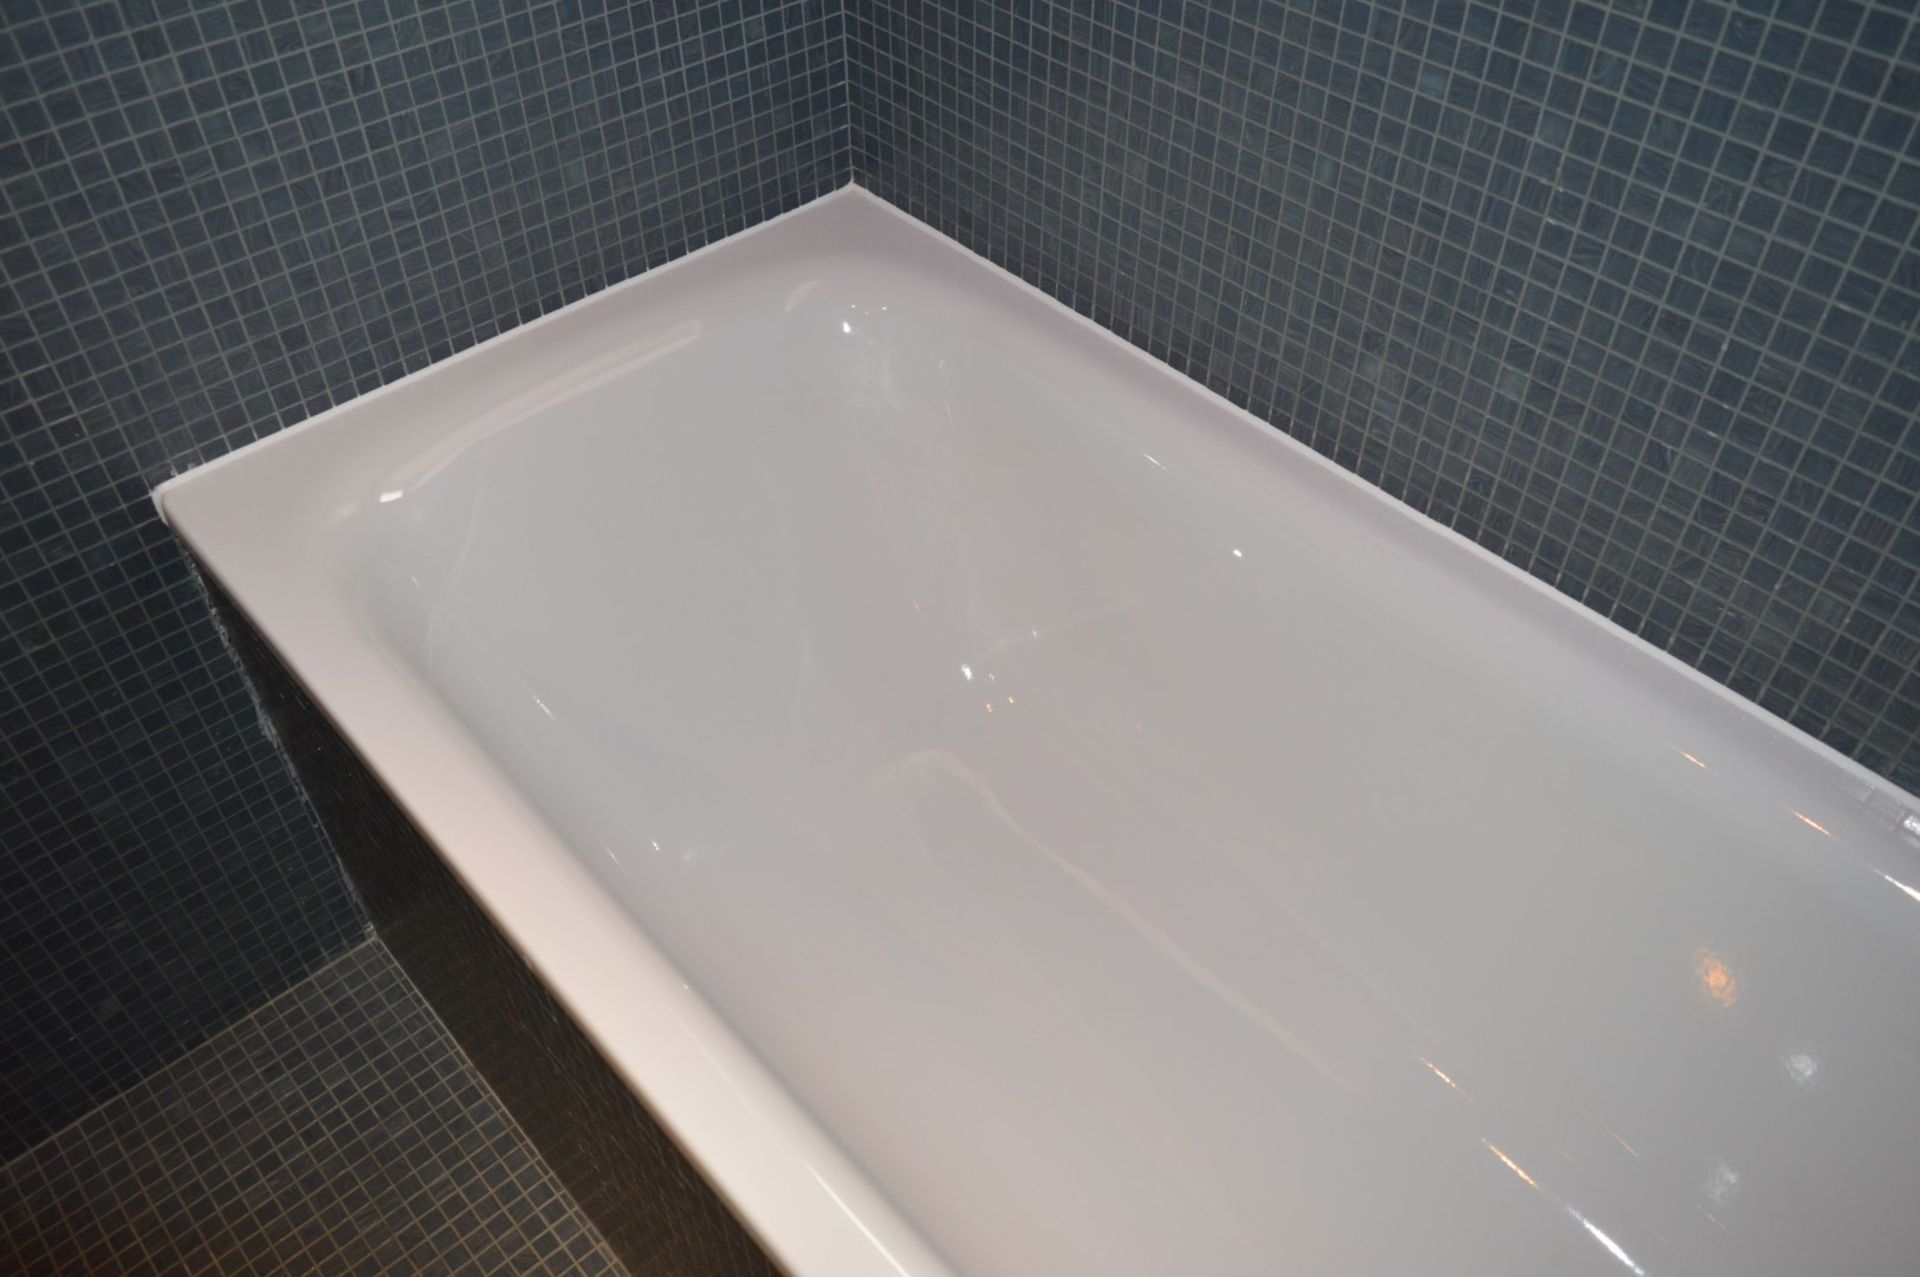 1 x Bathroom Suite Including Vanity Unit With Inset Basin, Dorn Bracht Mixer Tap, Duravit Wall - Image 4 of 17